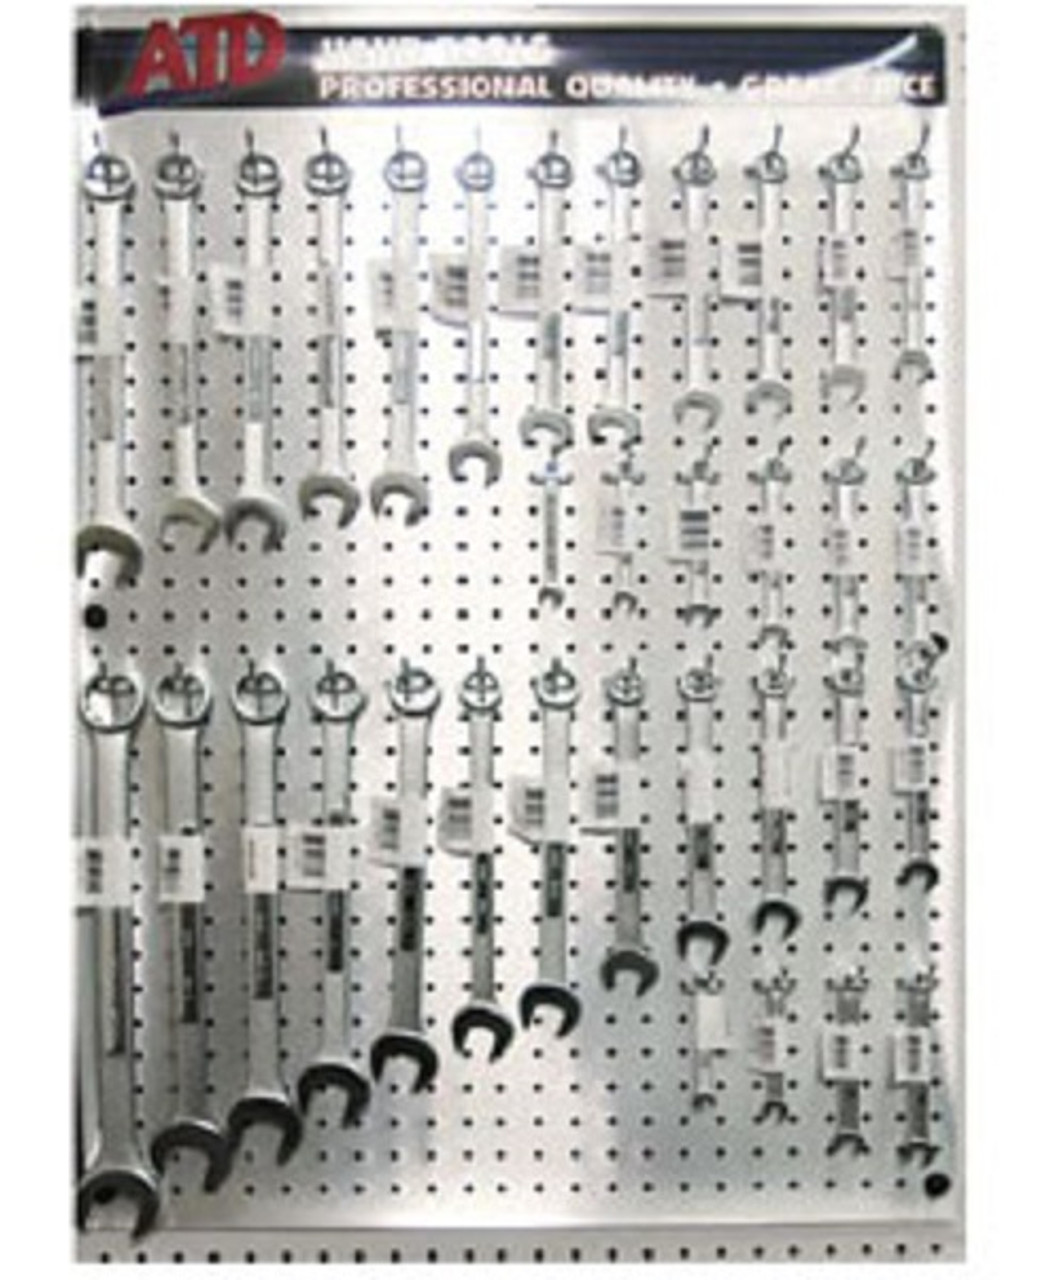 Raised Panel Combination Wrench Display Fixture